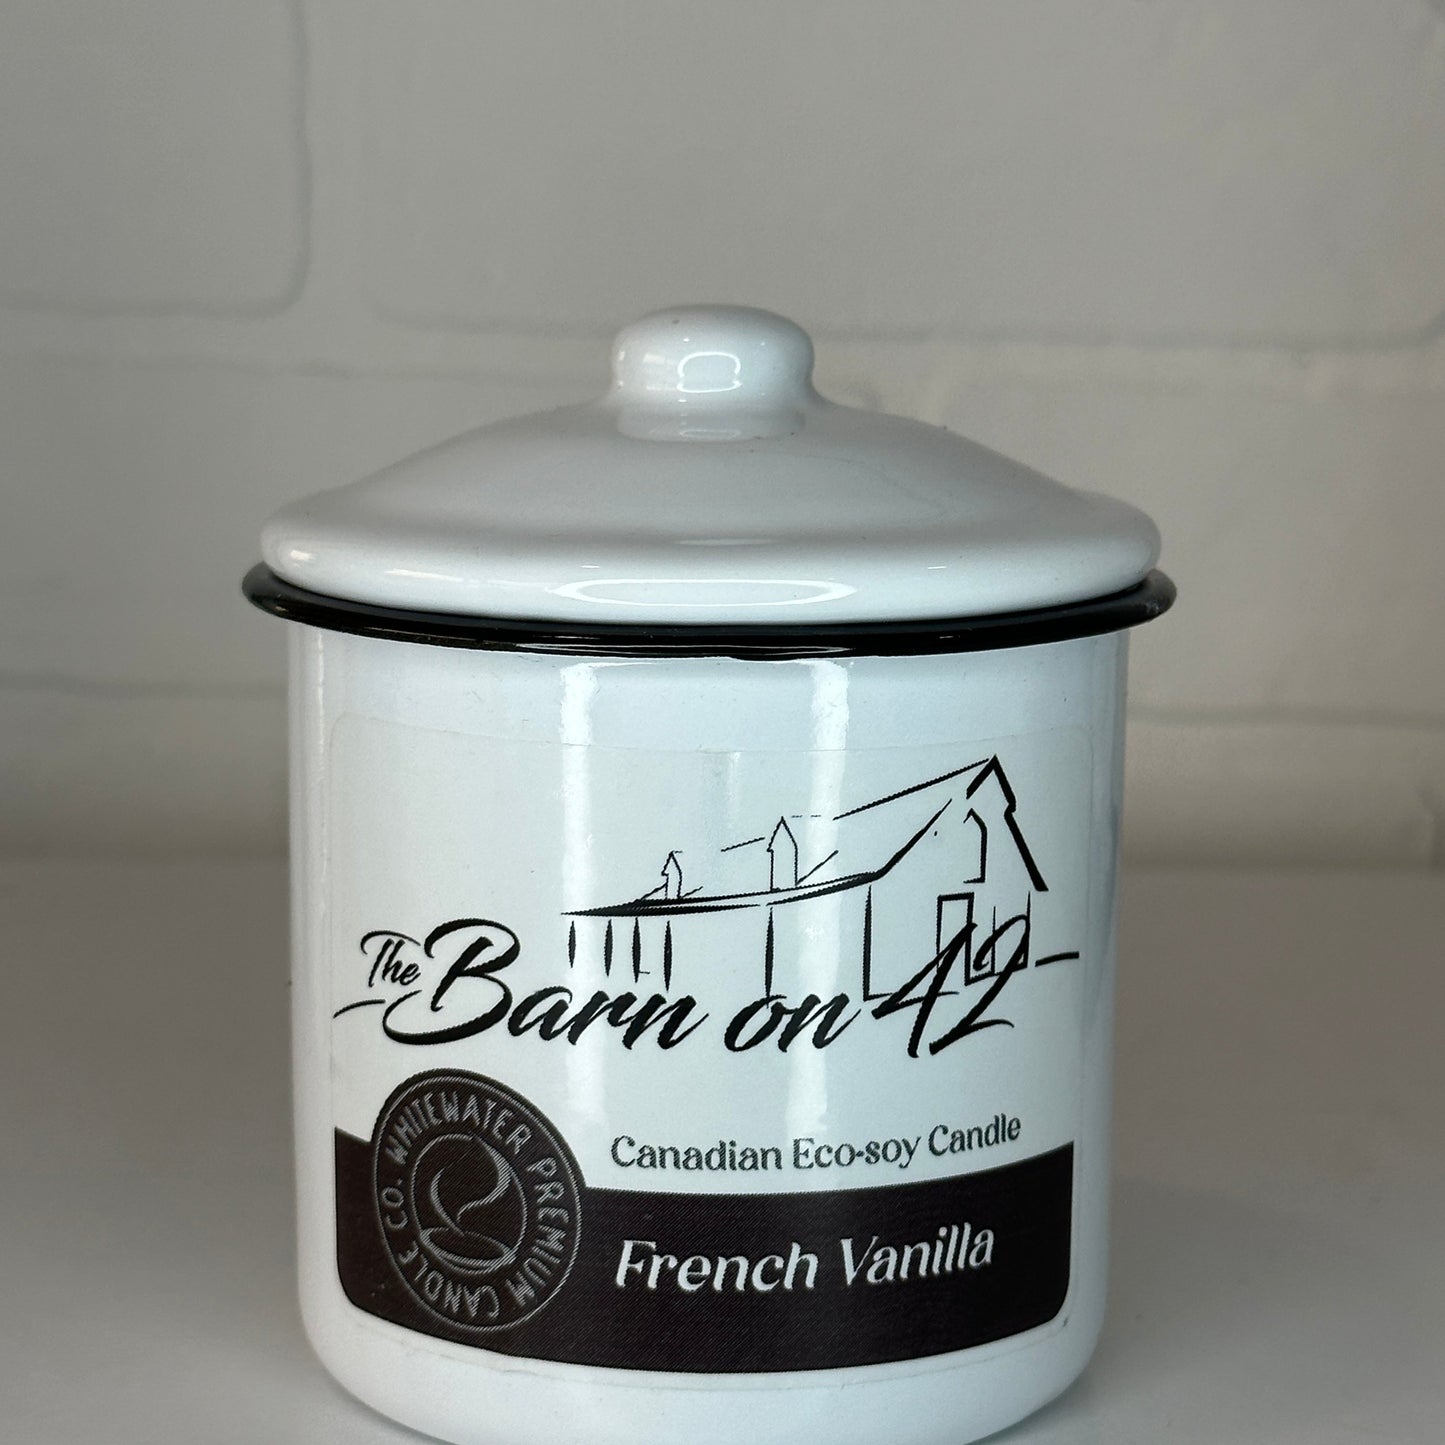 French Vanilla 9 oz Eco-Soy Candle Whitewater Candles